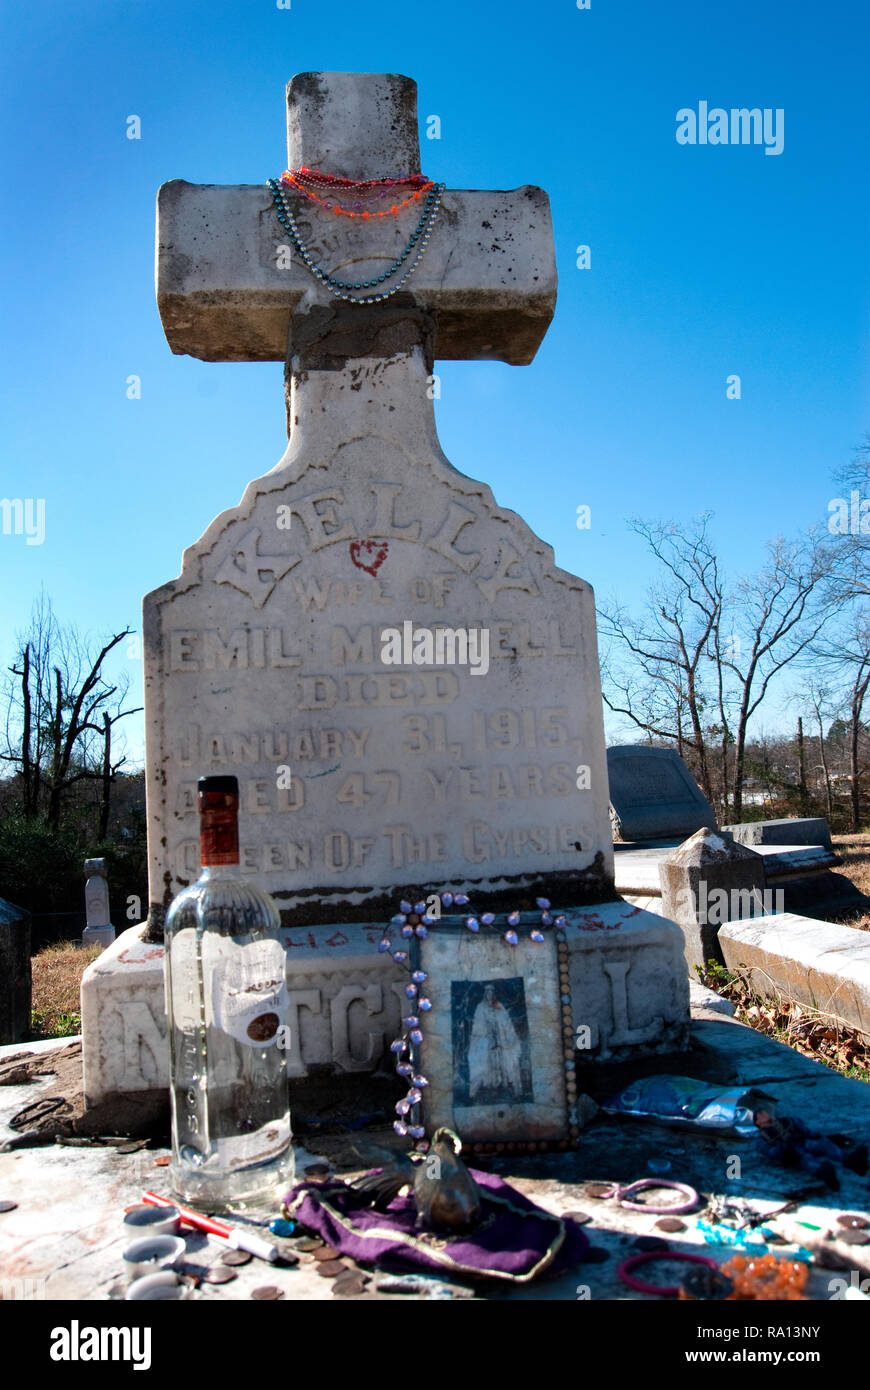 Mardi Gras beads decorate the headstone of gypsy queen Kelly Mitchell at Rose Hill Cemetery in Meridian, Mississippi. Stock Photo